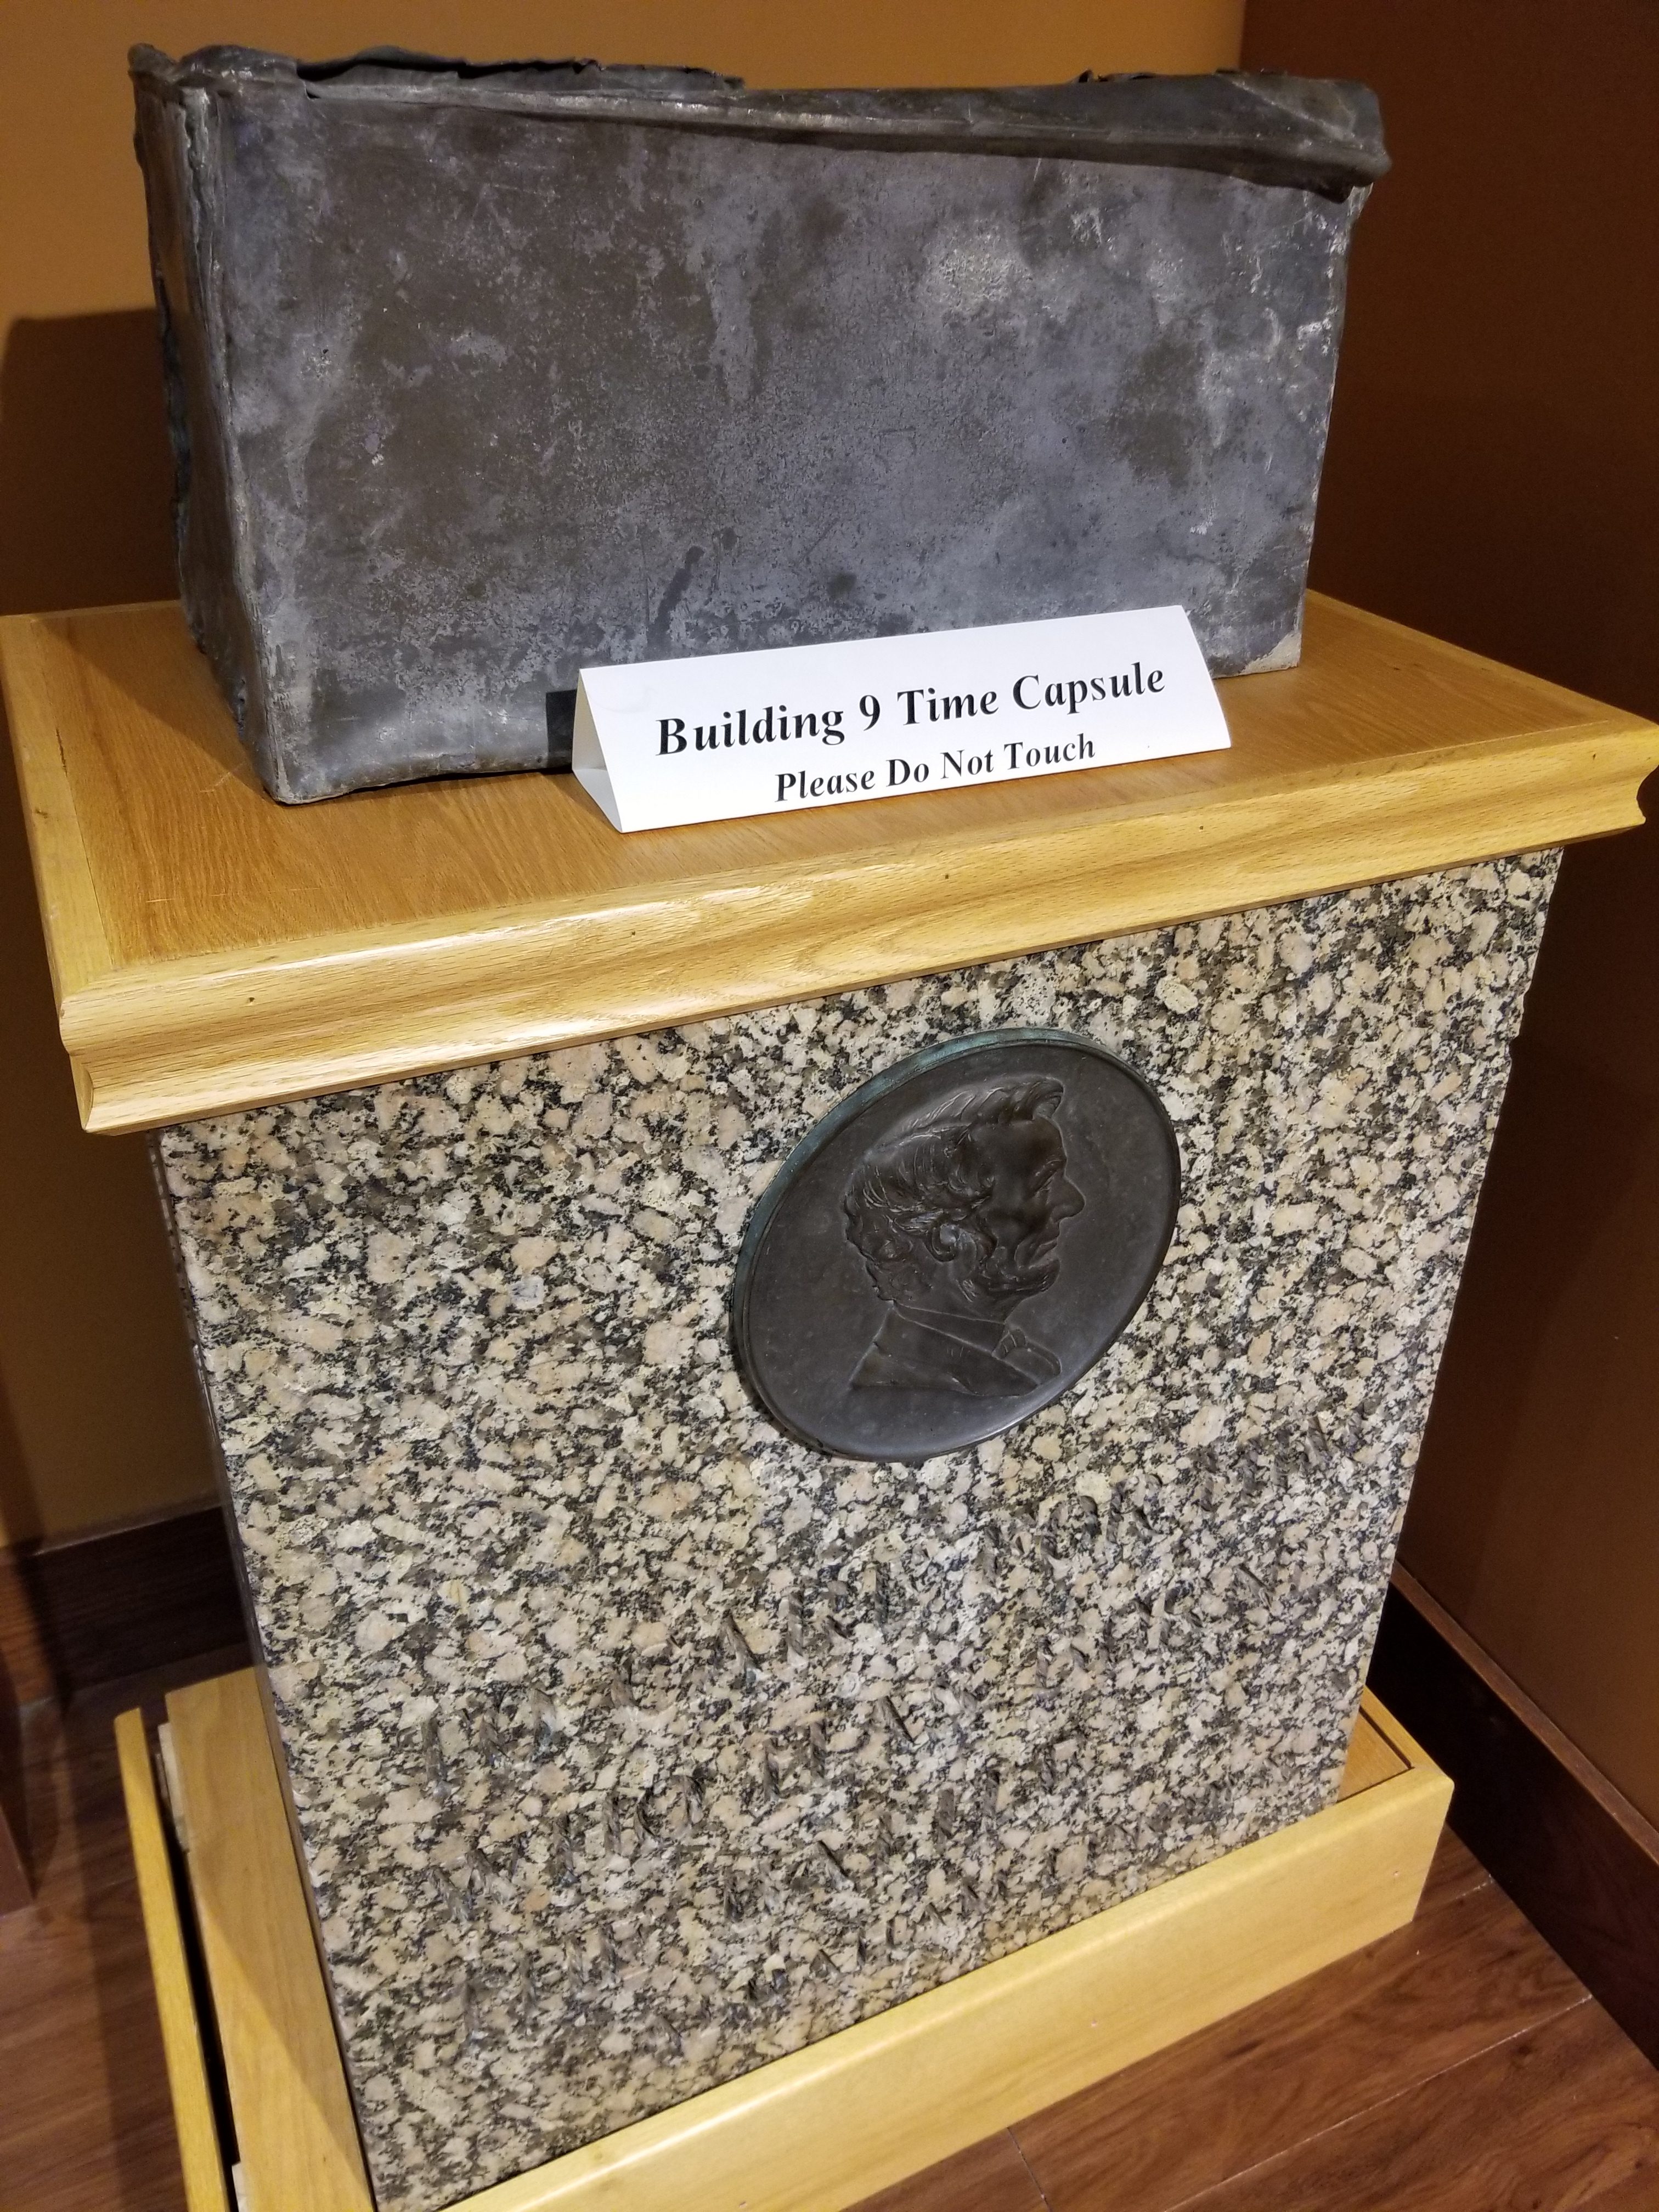 Building 9 time capsule